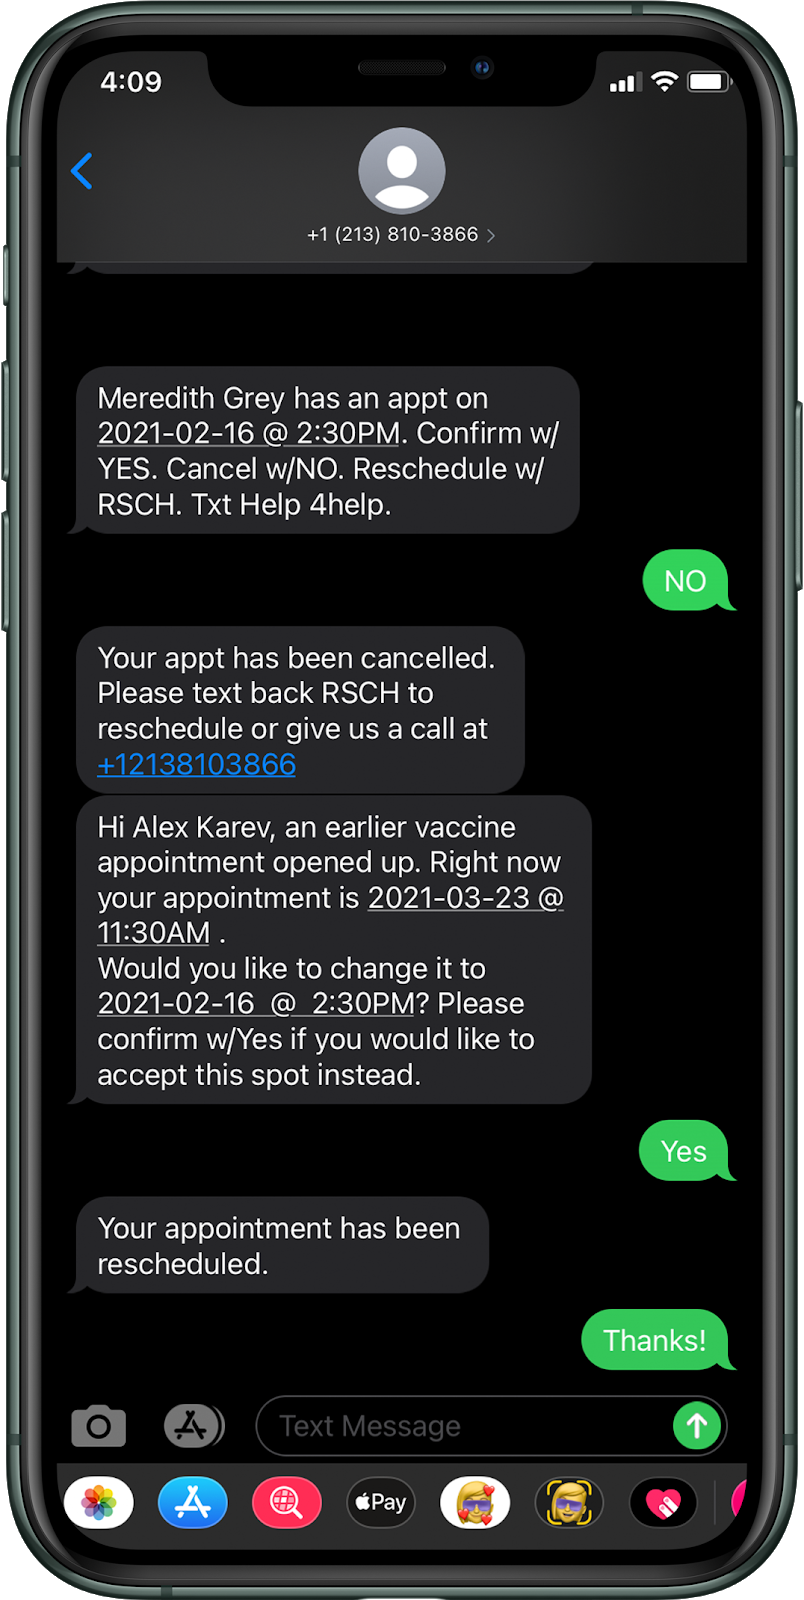 image of an iPhone with examples of text messages that will come through when the vaccine appointment reminder is set up.